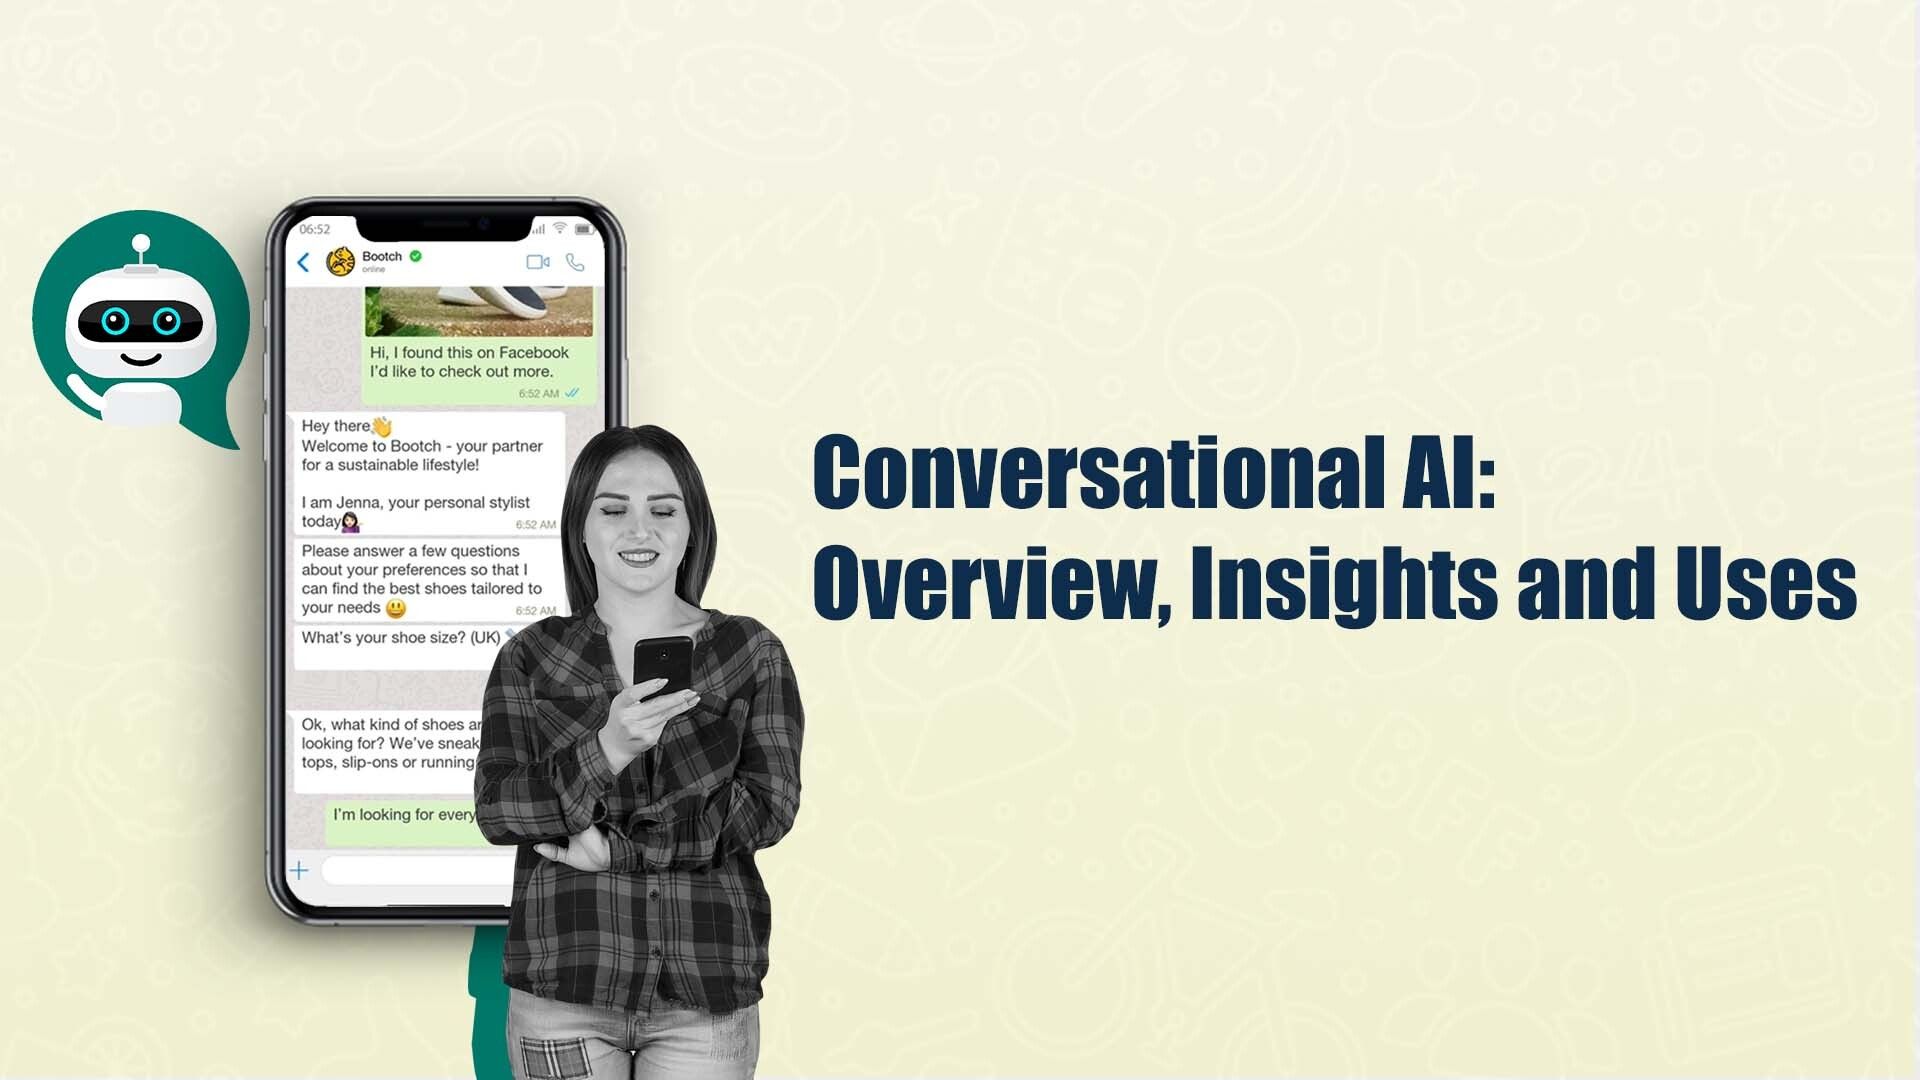 Conversational AI: Overview, Insights and Uses